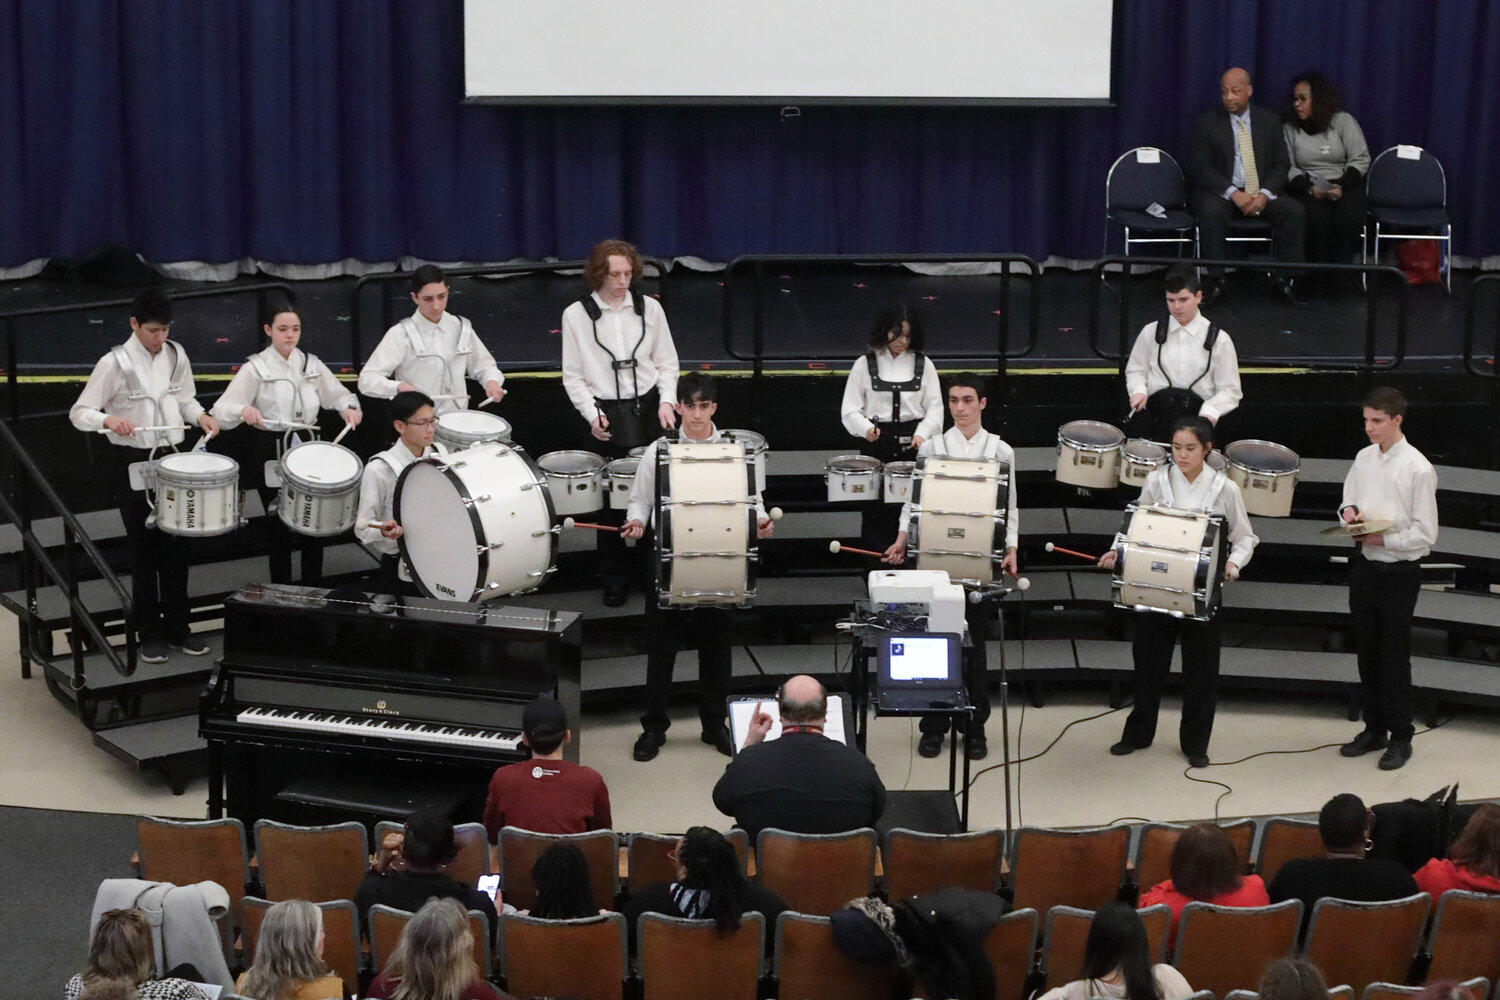 The Glen Cove High School drumline, led by Jerry Noble, performed at the celebration.